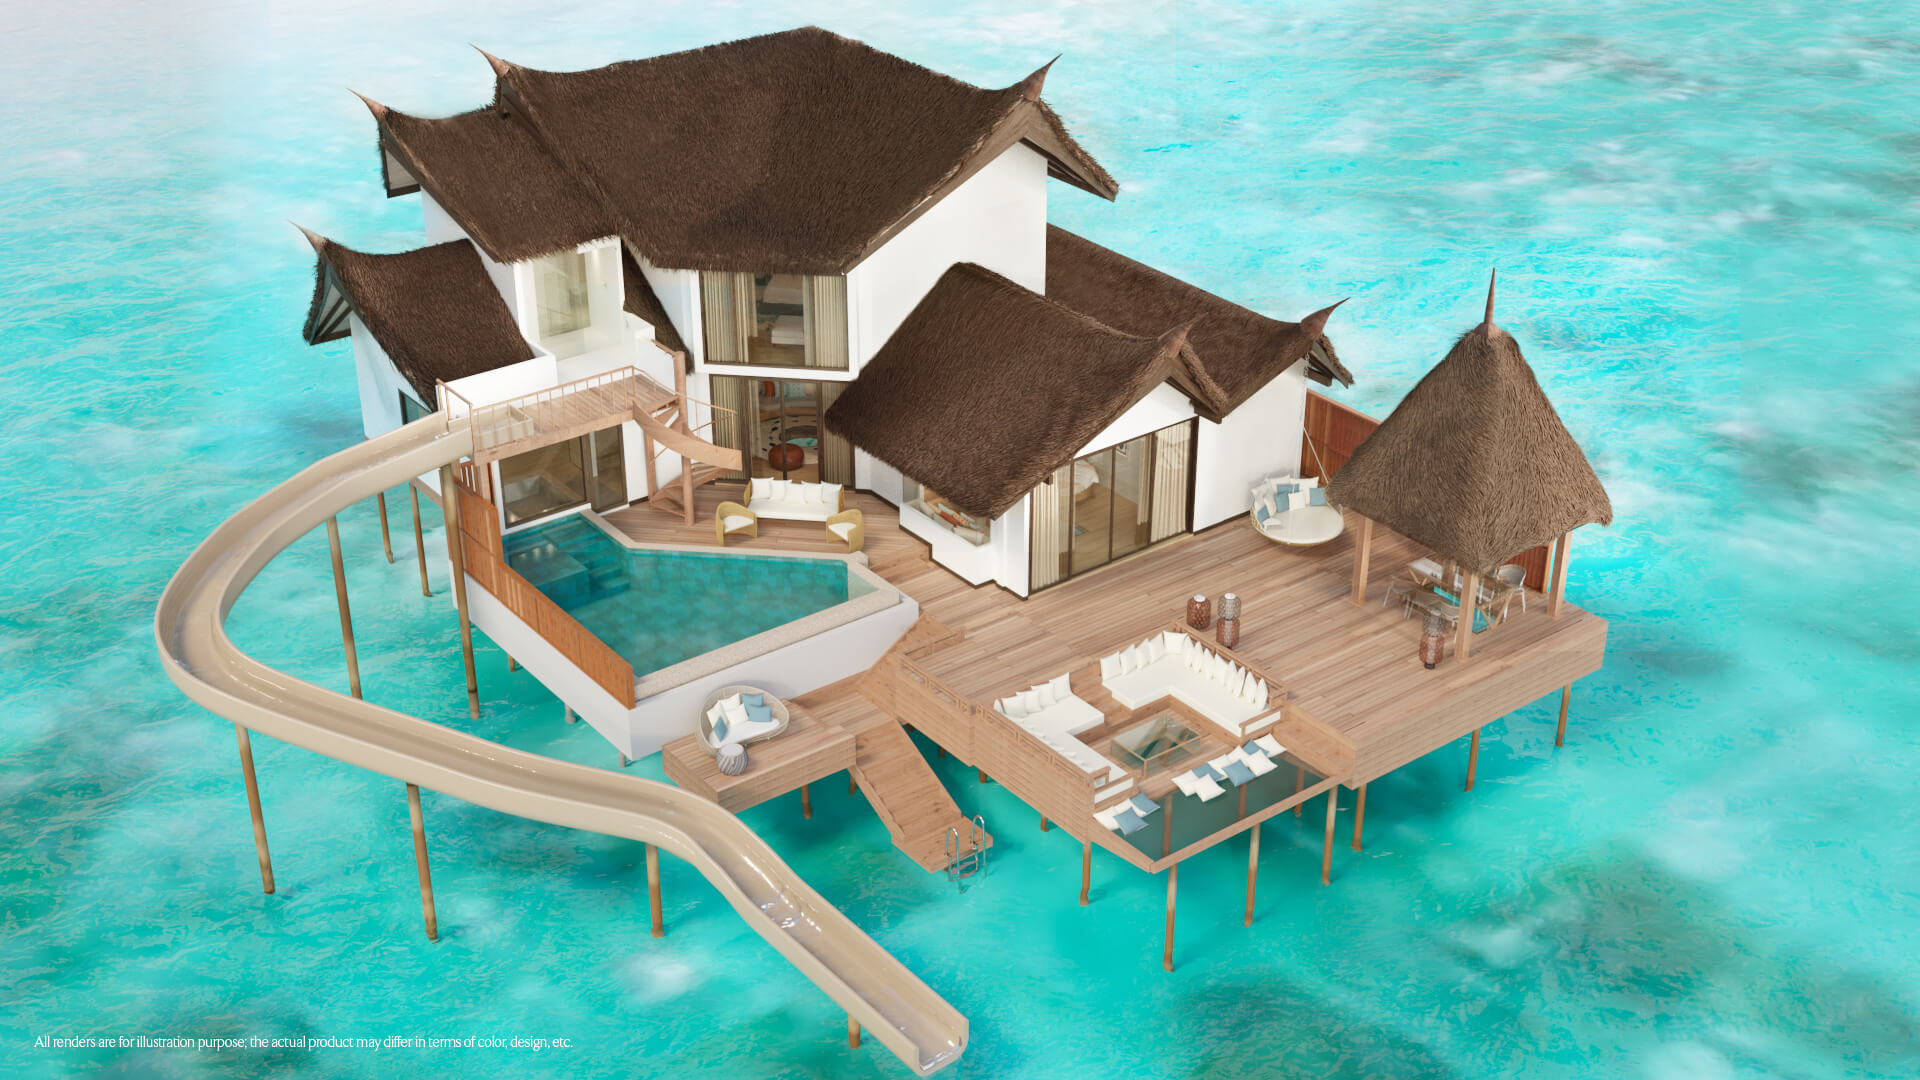 Private-Ocean-Retreat-with-Slide-Aerial-View-illustration